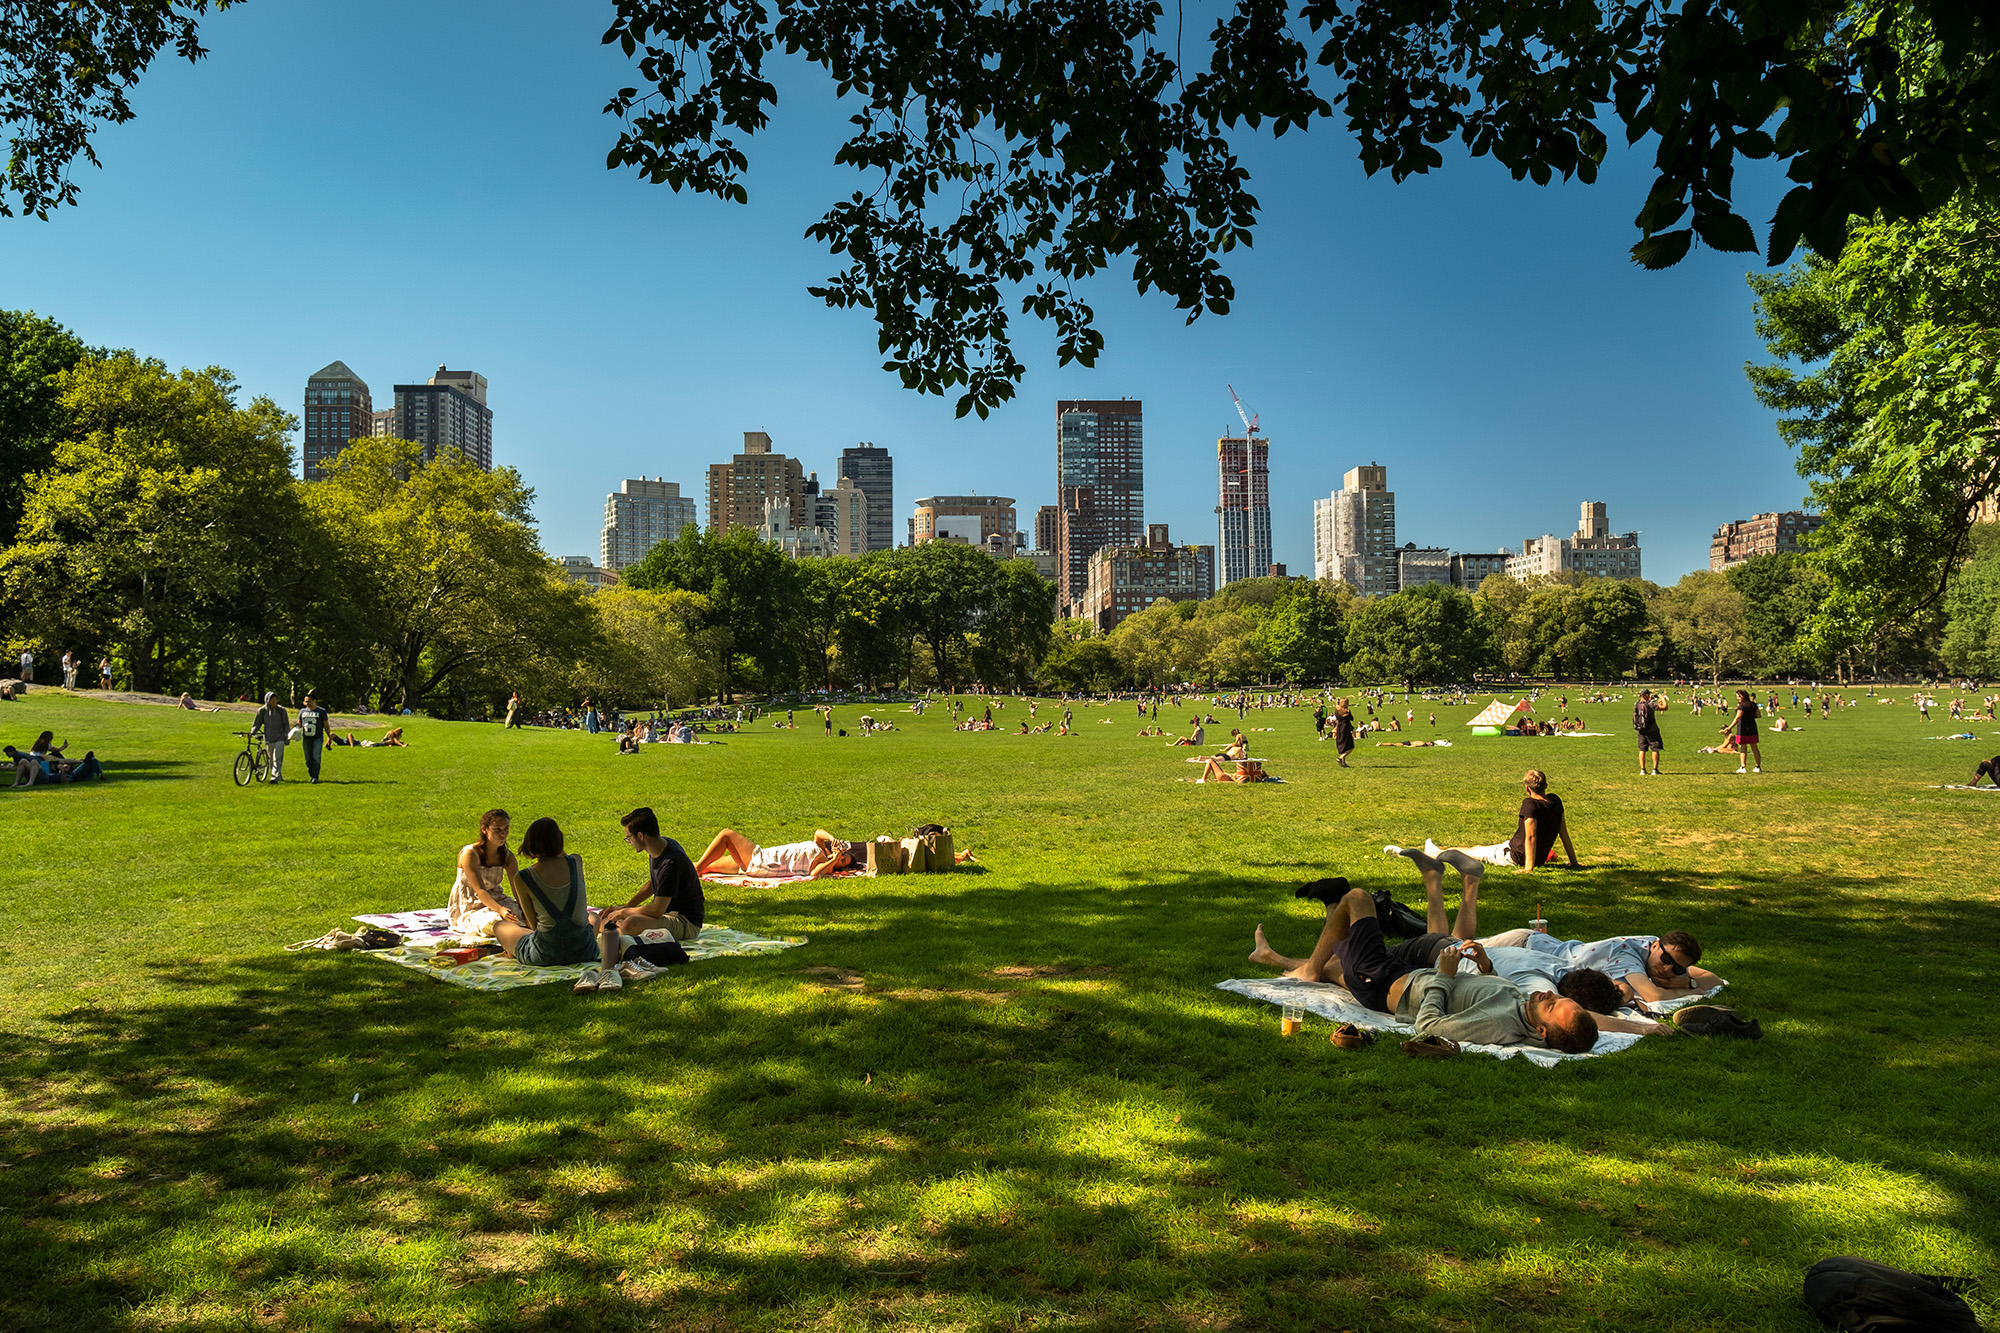 Central Park Sheep Meadow with people relaxing